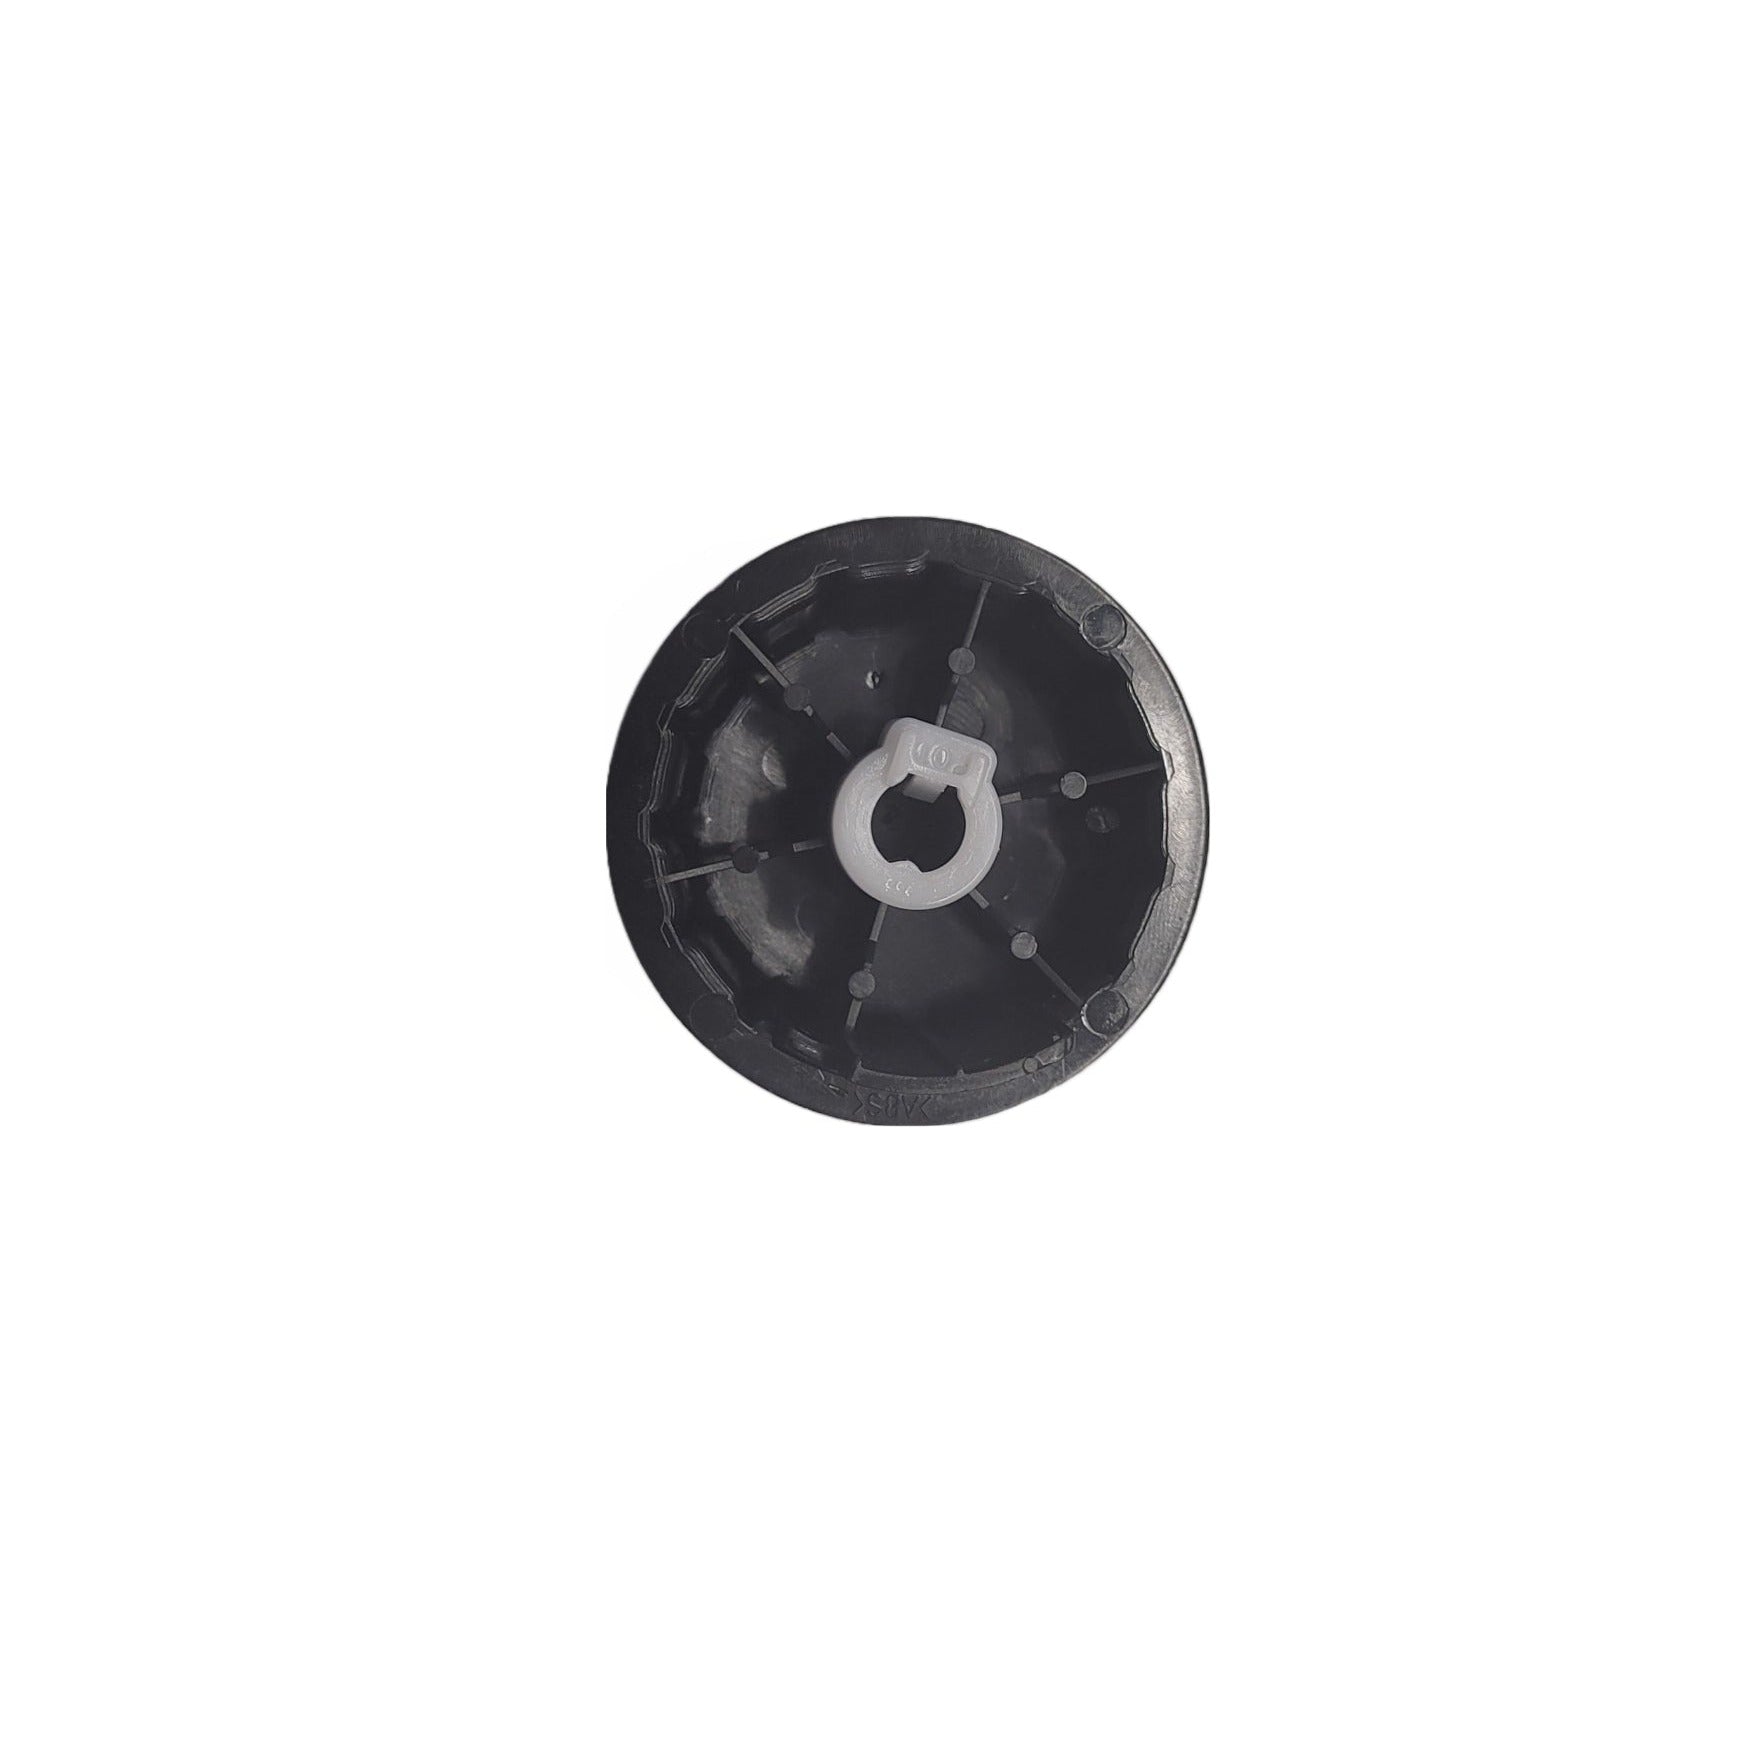 Replacement Knob for Zibro Paraffin Heater